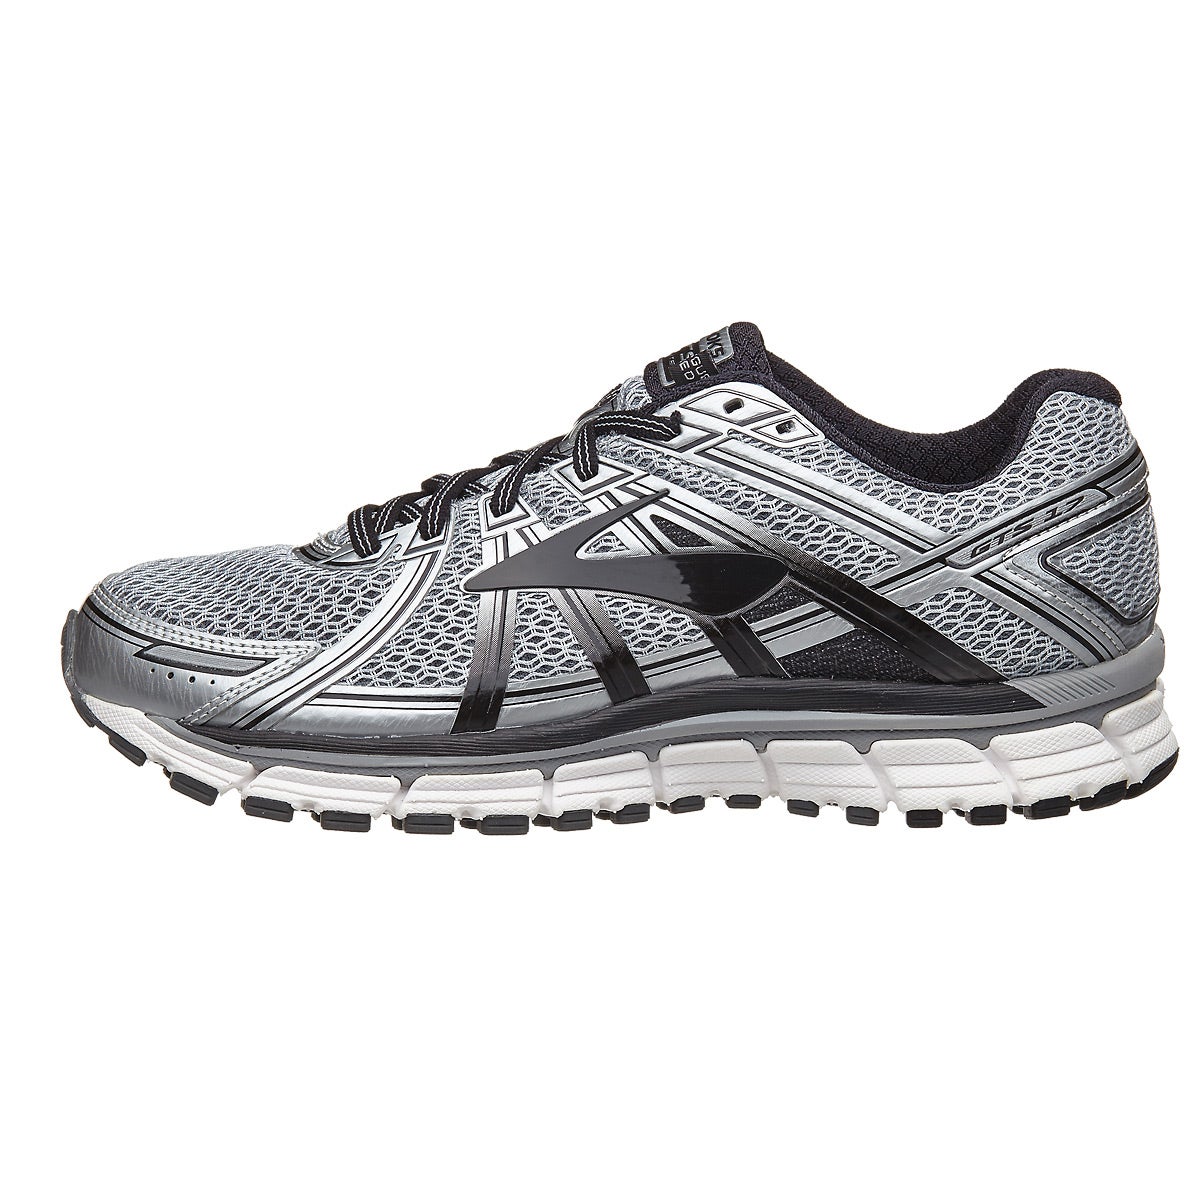 about brooks adreneline shoes